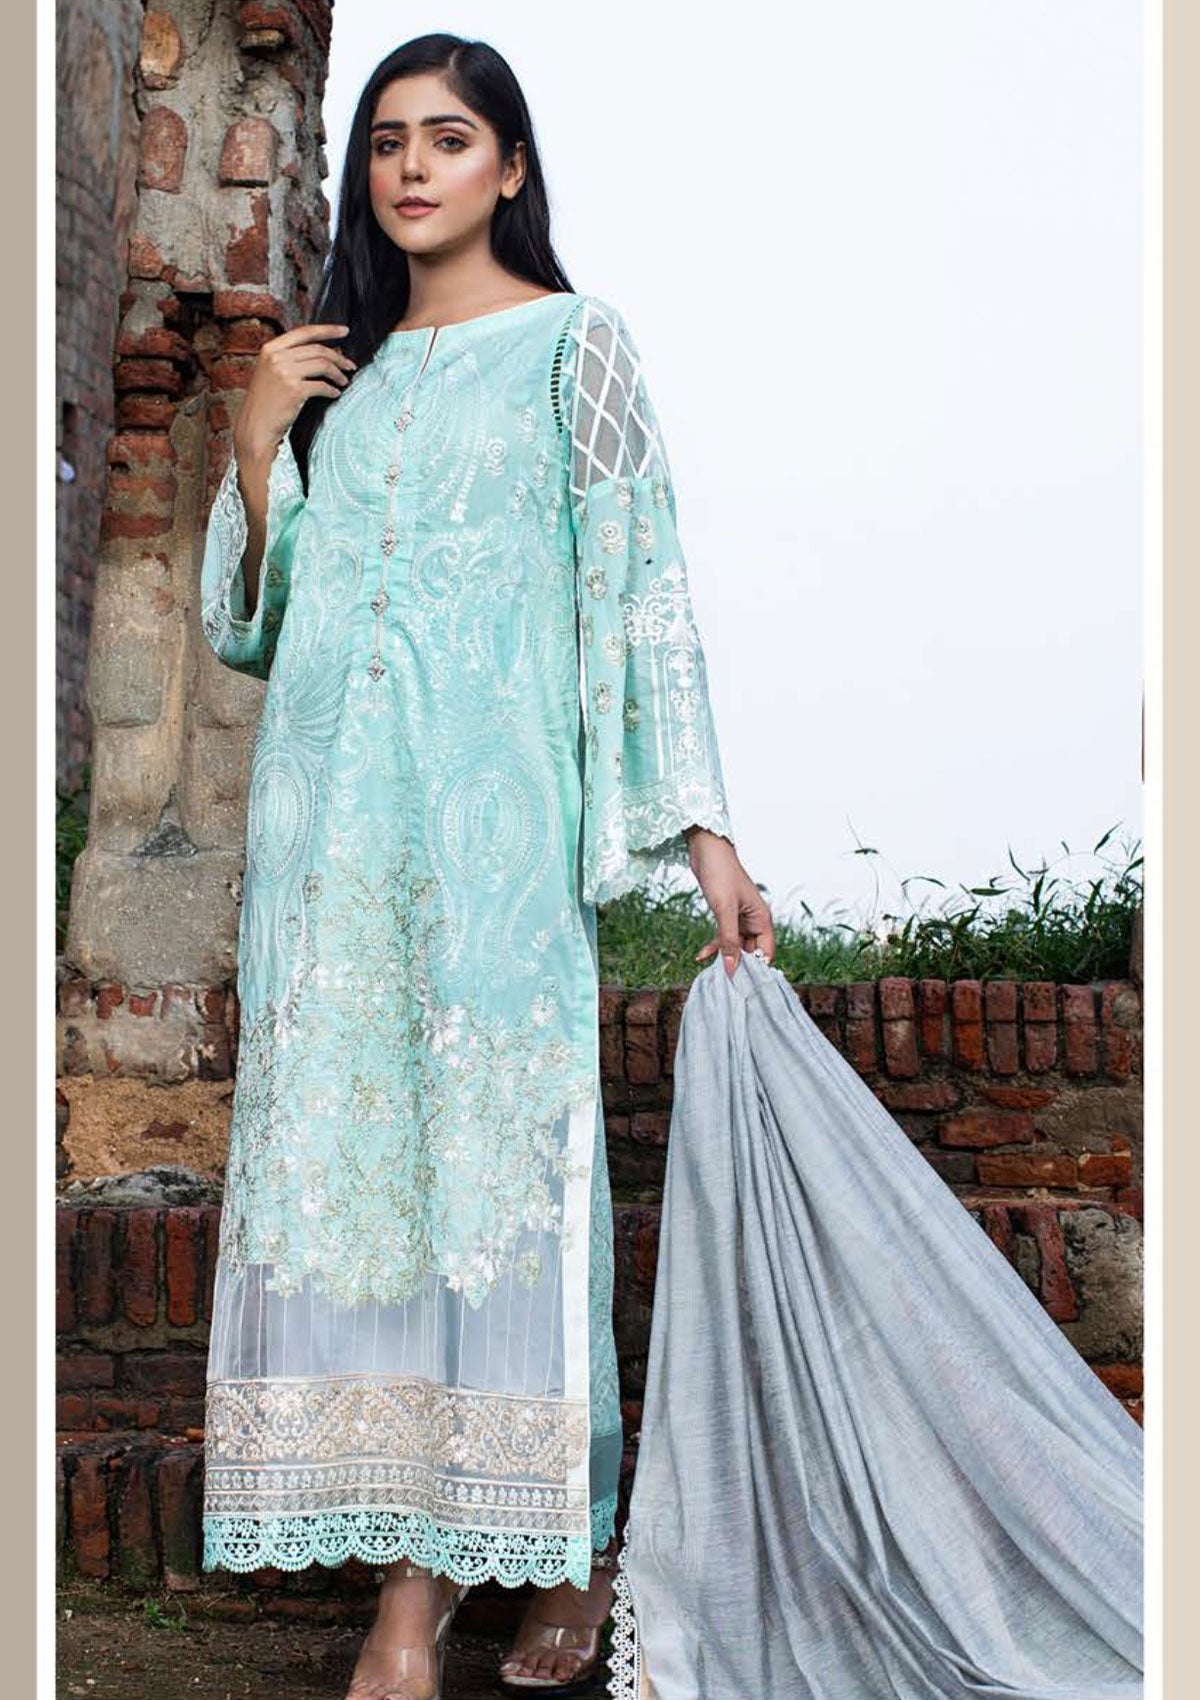 Lawn Collection - Zunuj - Saanjh - ZS#03 available at Saleem Fabrics Traditions